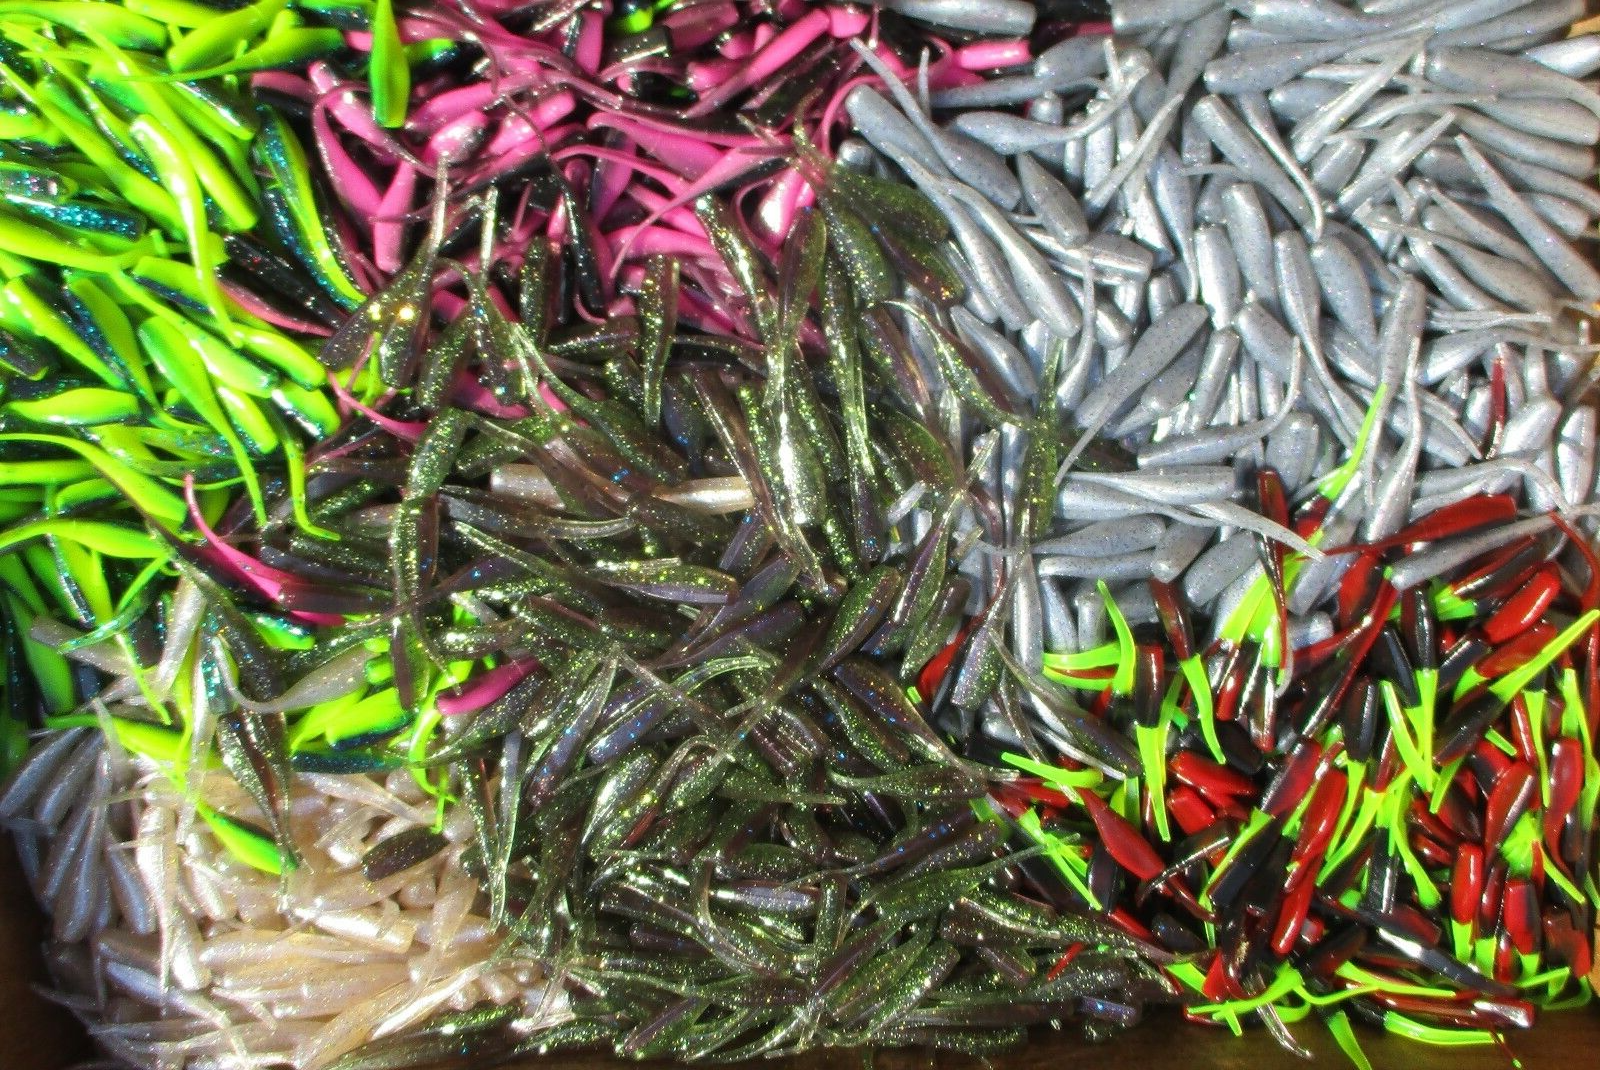 50ct ASSORTED MIXTURE 2" STINGER SHAD GRUBS Crappie Fishing Lures Quiver Tail All American Tournament Quality Soft Plastic Baits 2StShadMinnow.ASST50ct